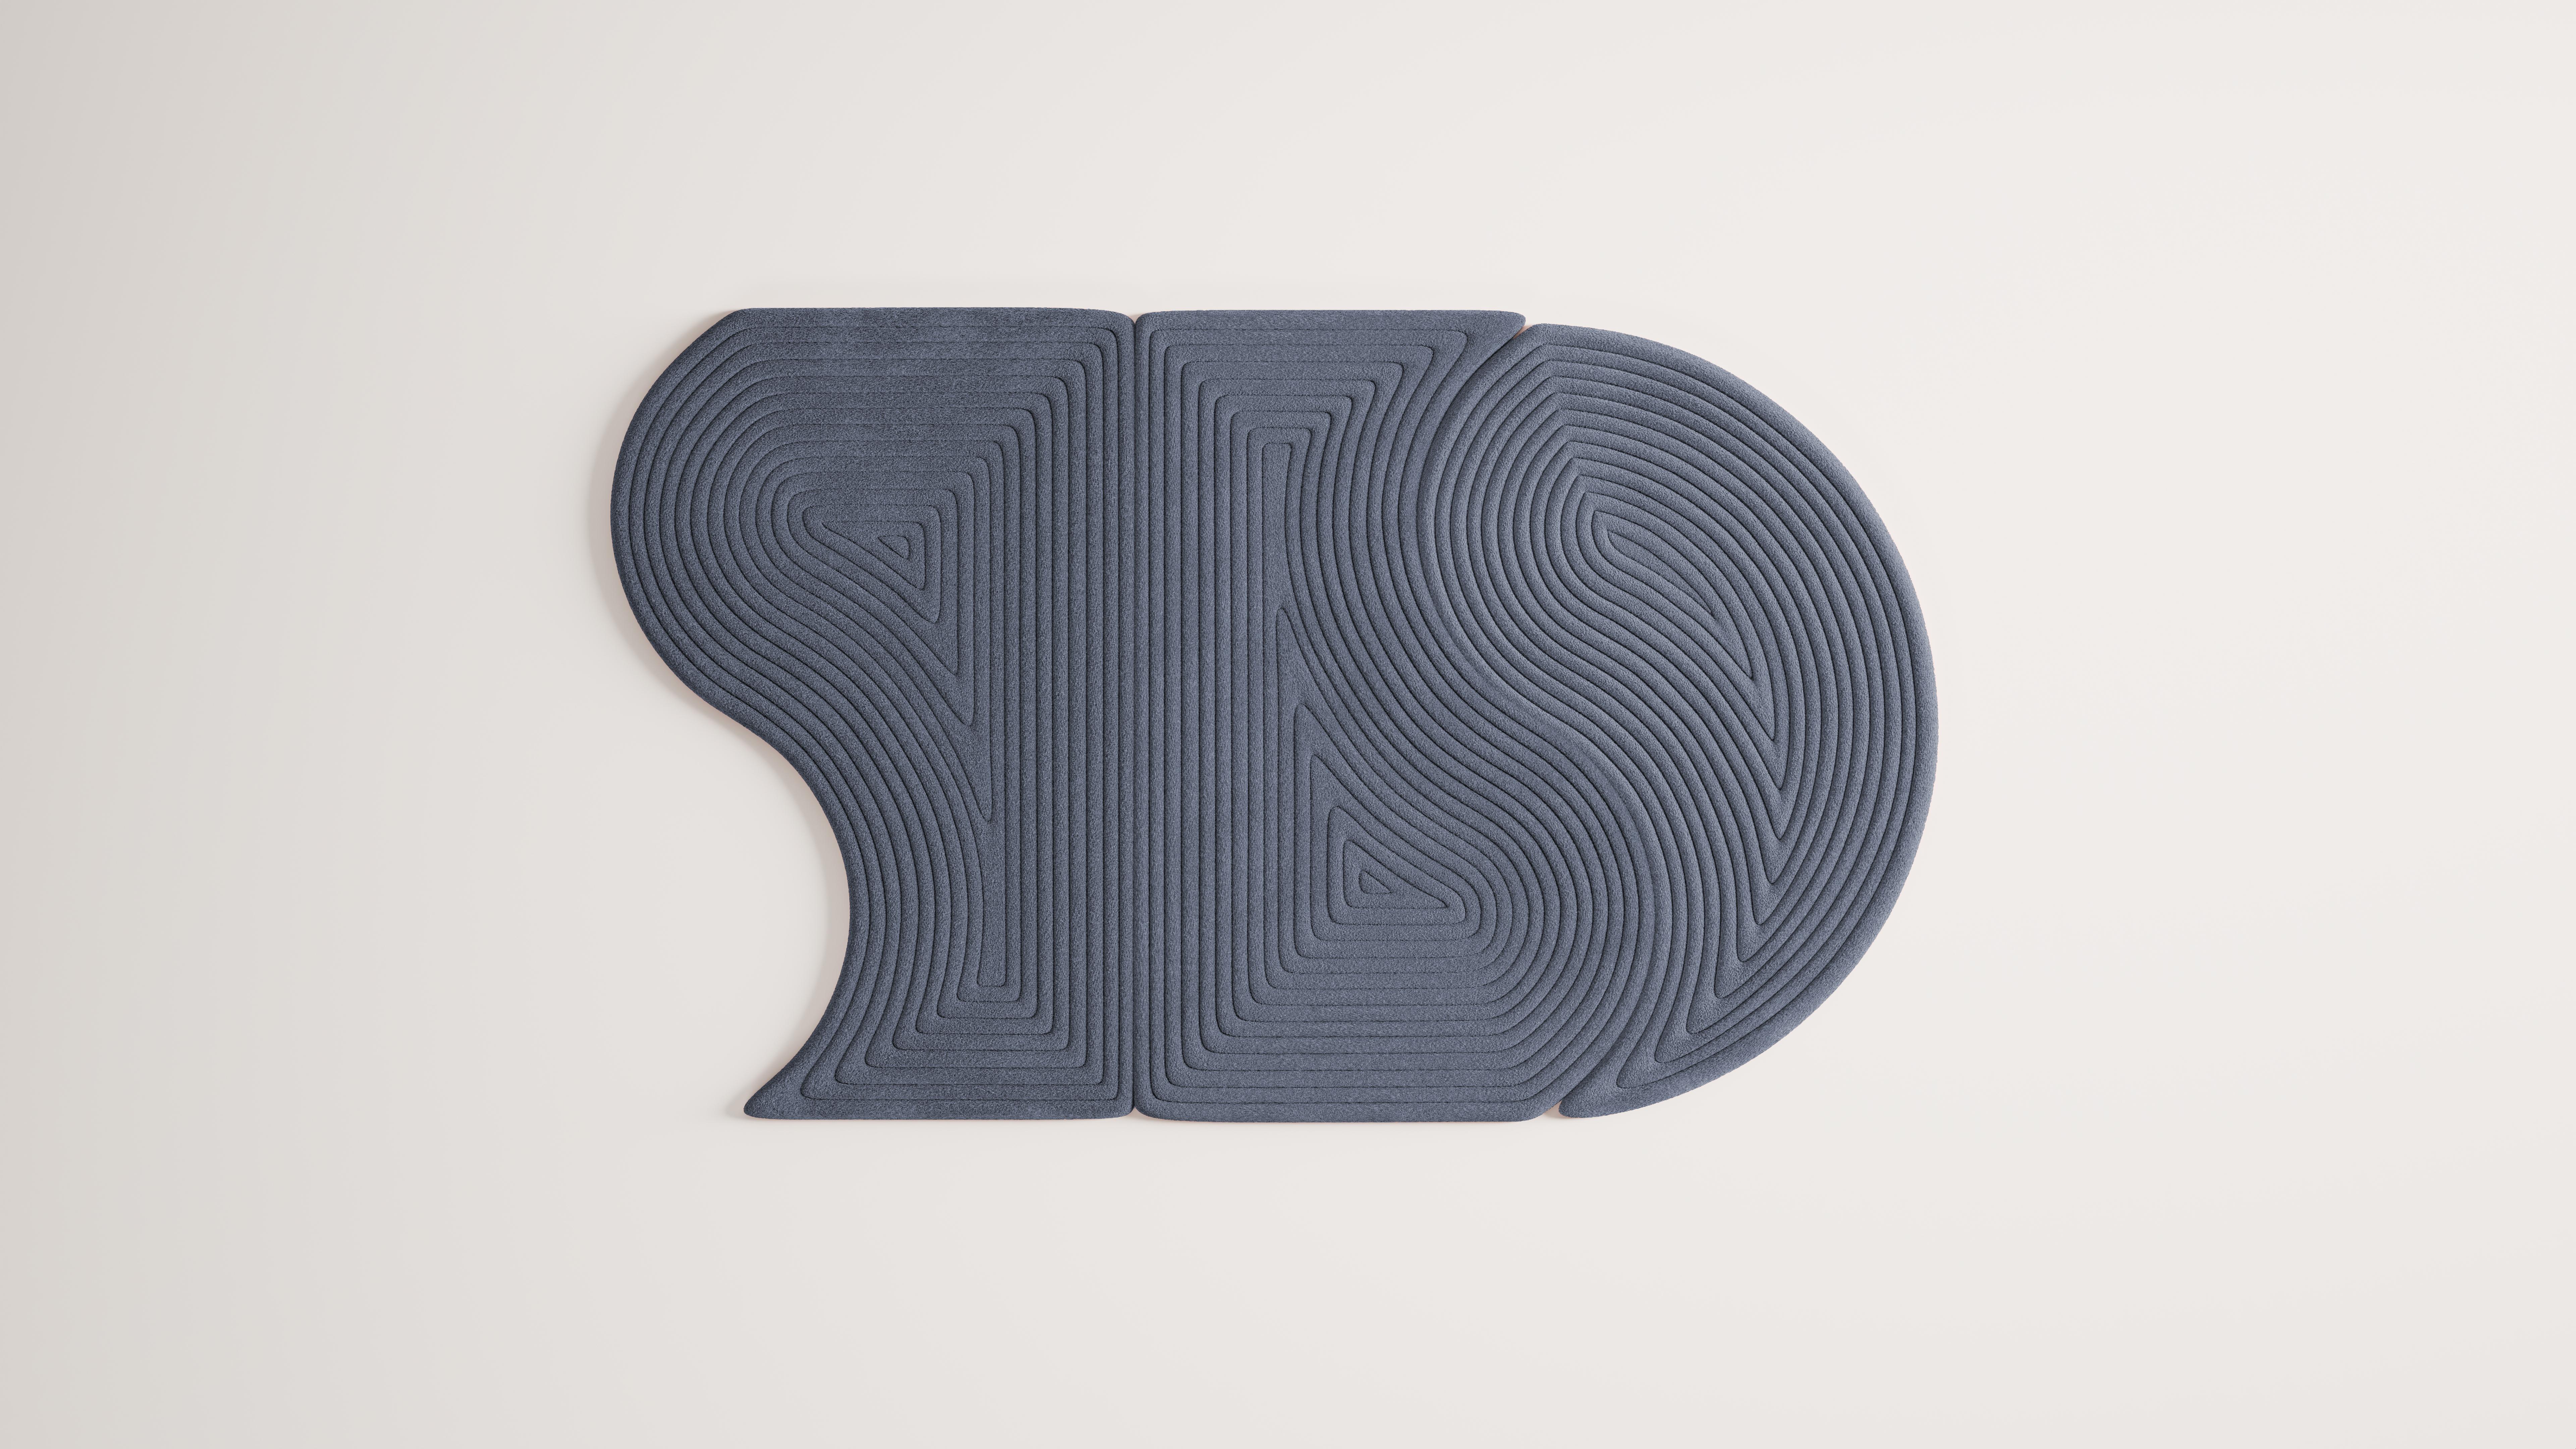 Niwa is a collection of minimal and organic modular rugs. Each module can be combined with others in endless ways to create customizable configurations. 

This collection is a representation of the sand element within Zen Gardens. The rugs provide